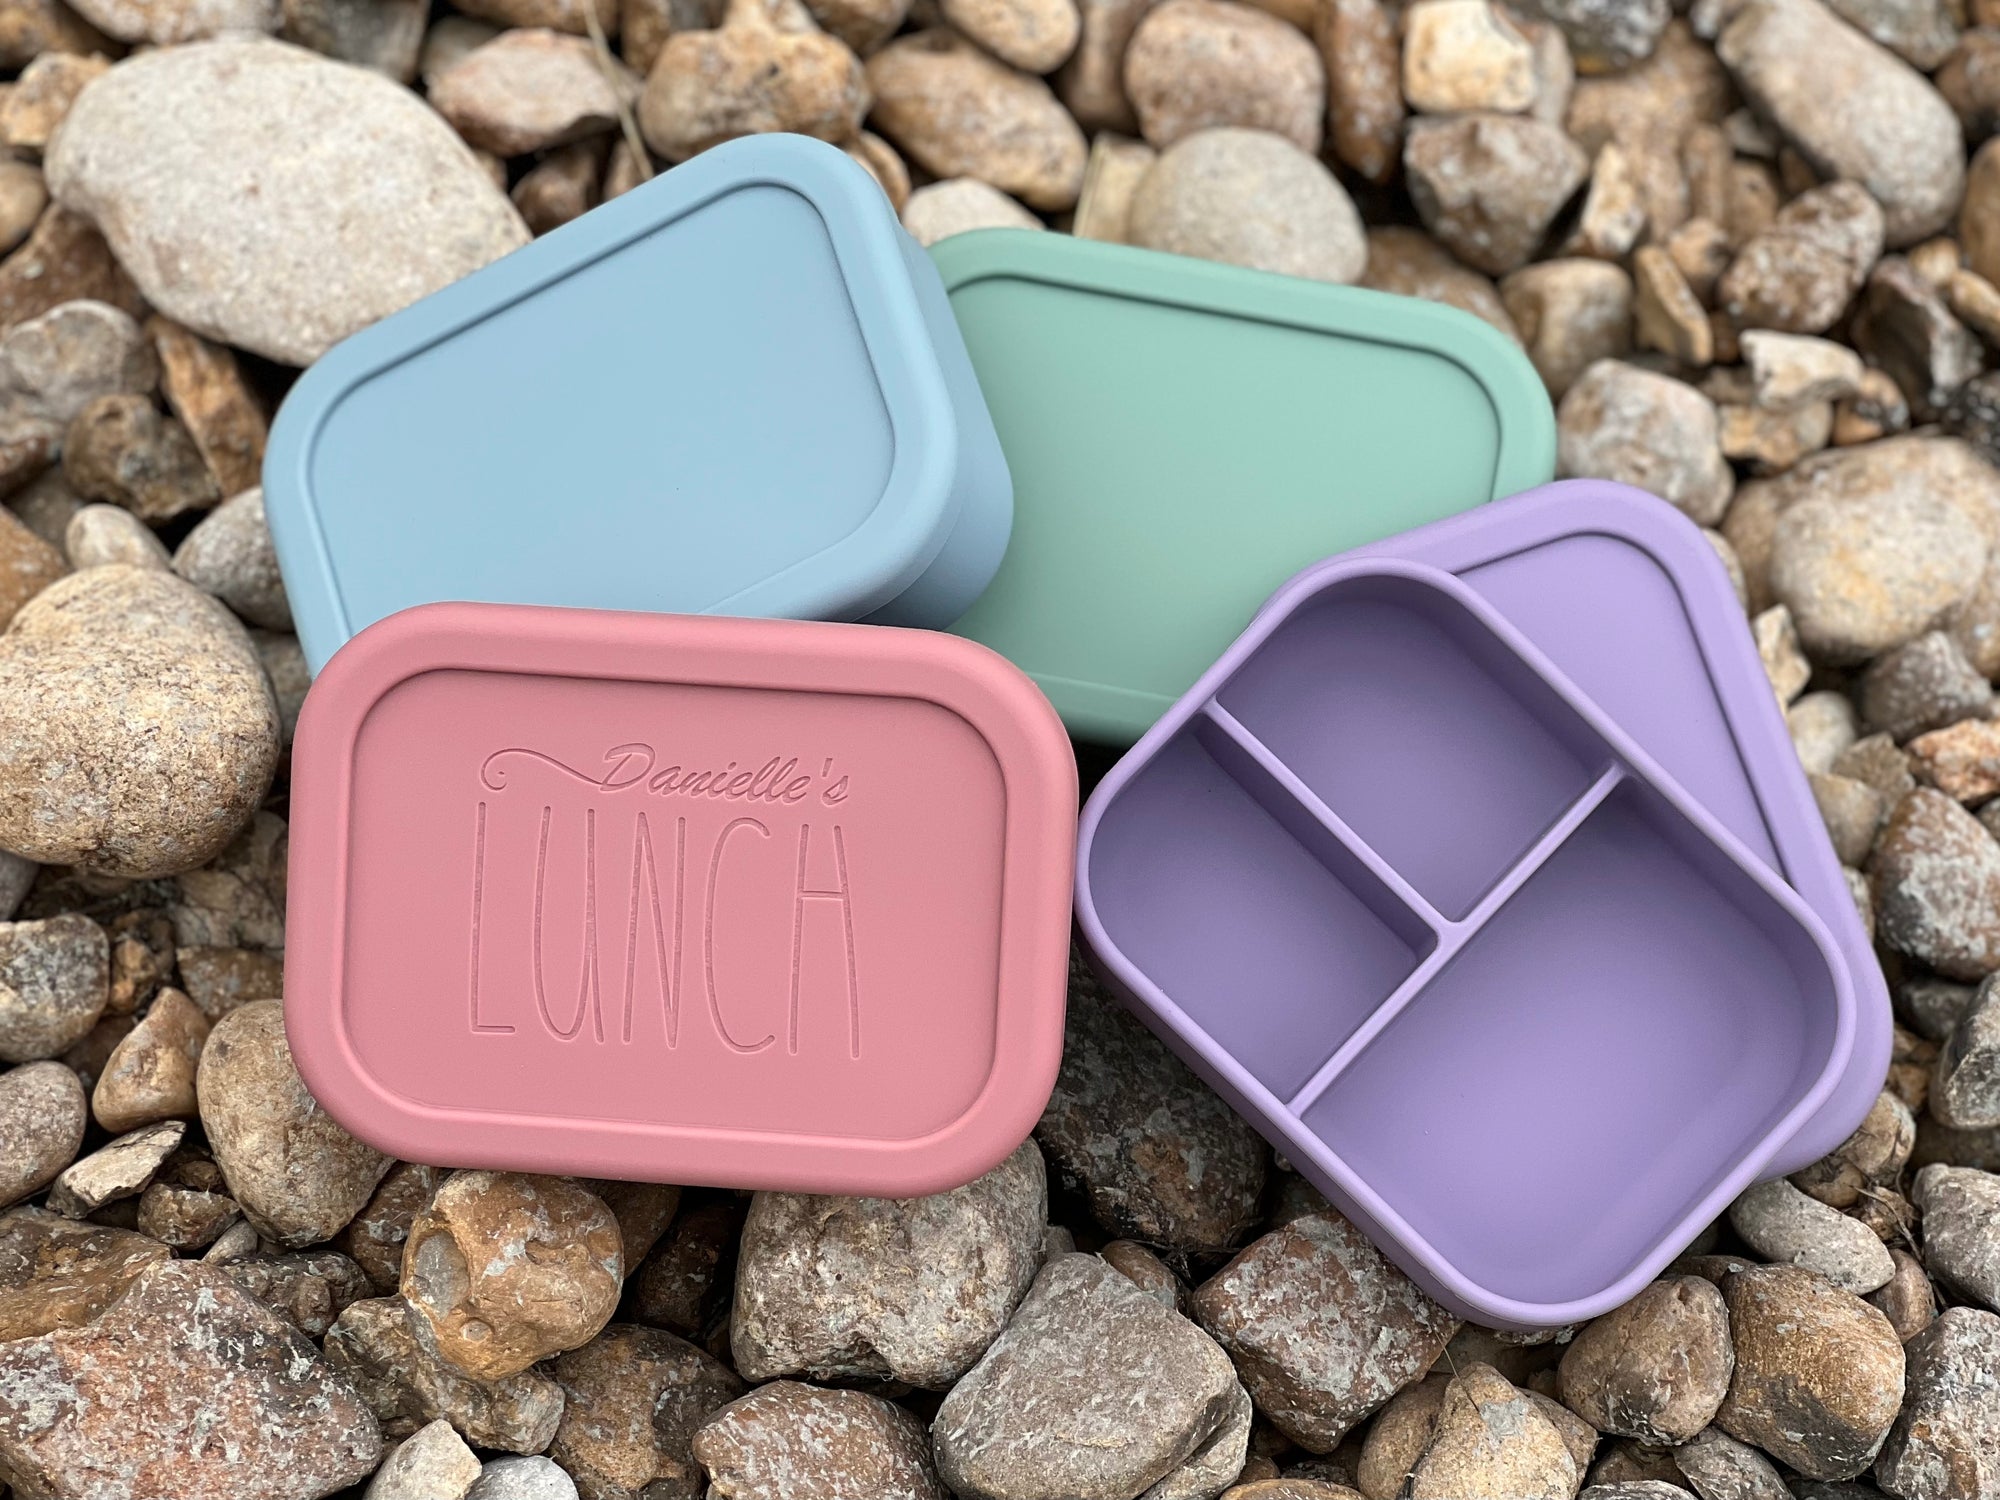 Customized Silicone Bento Box Kids Lunch Box Personalized Name